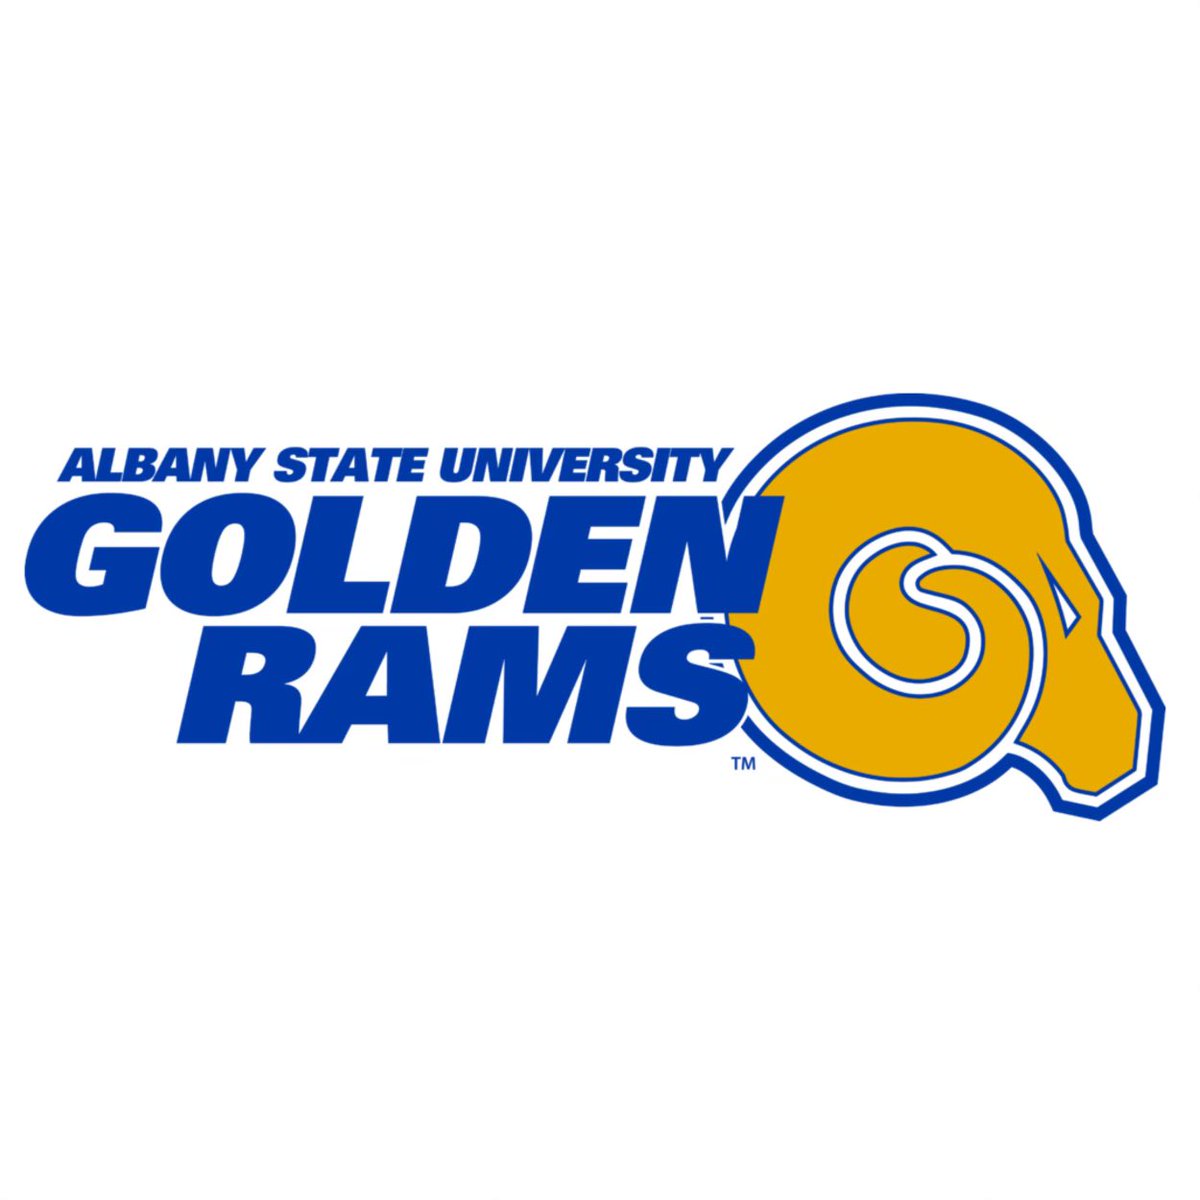 Blessed and very thankful to have received an offer from Albany State University 💙 @northside_pats @TEAM_SSB22 @Northsideladyp1 @AlbanyStateWBB @DrEjBrown @KyleSandy355